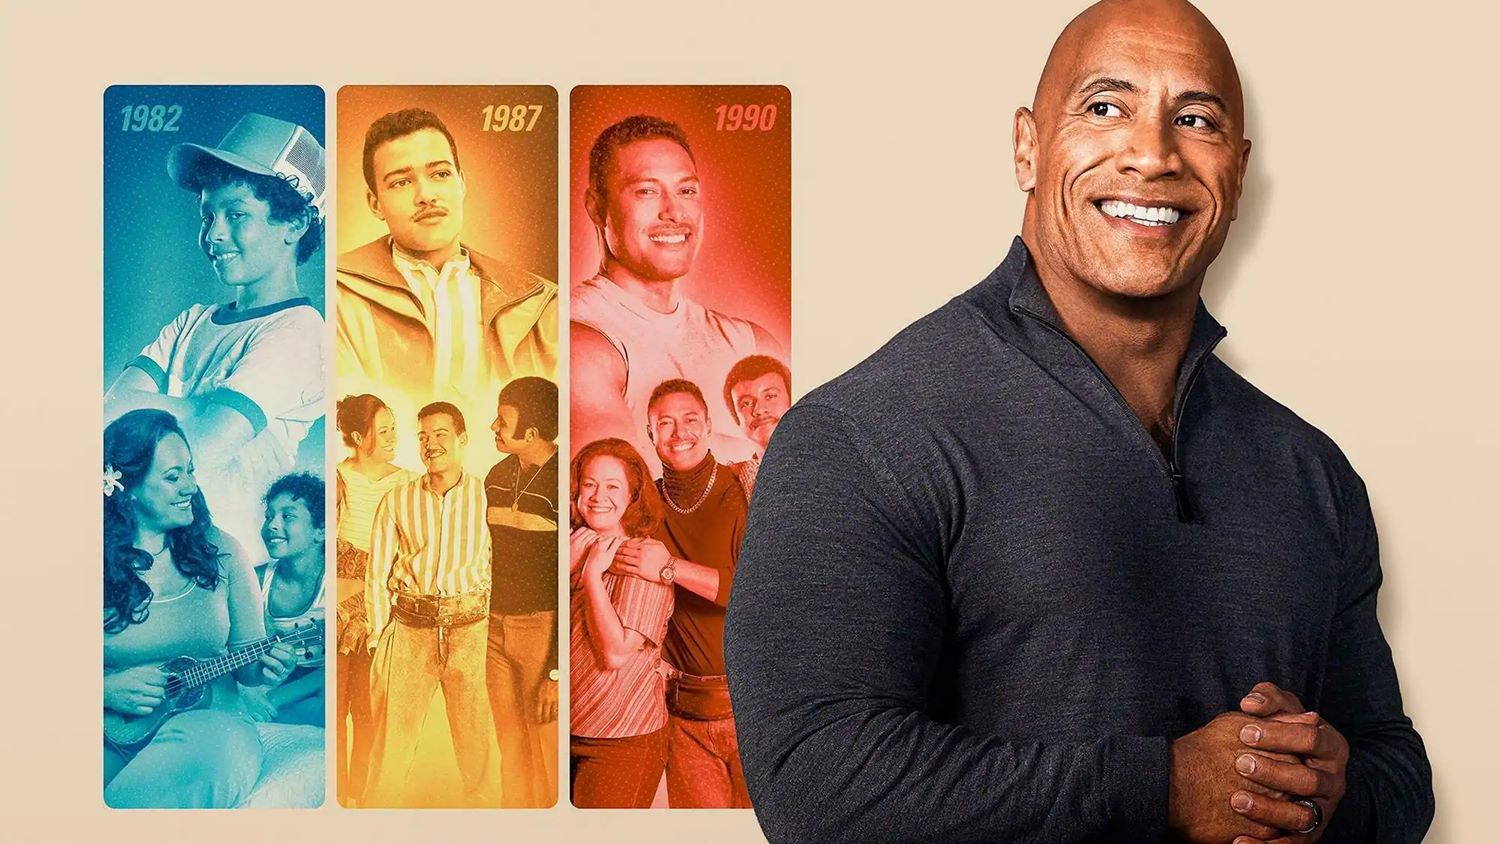 How To Watch The Rock